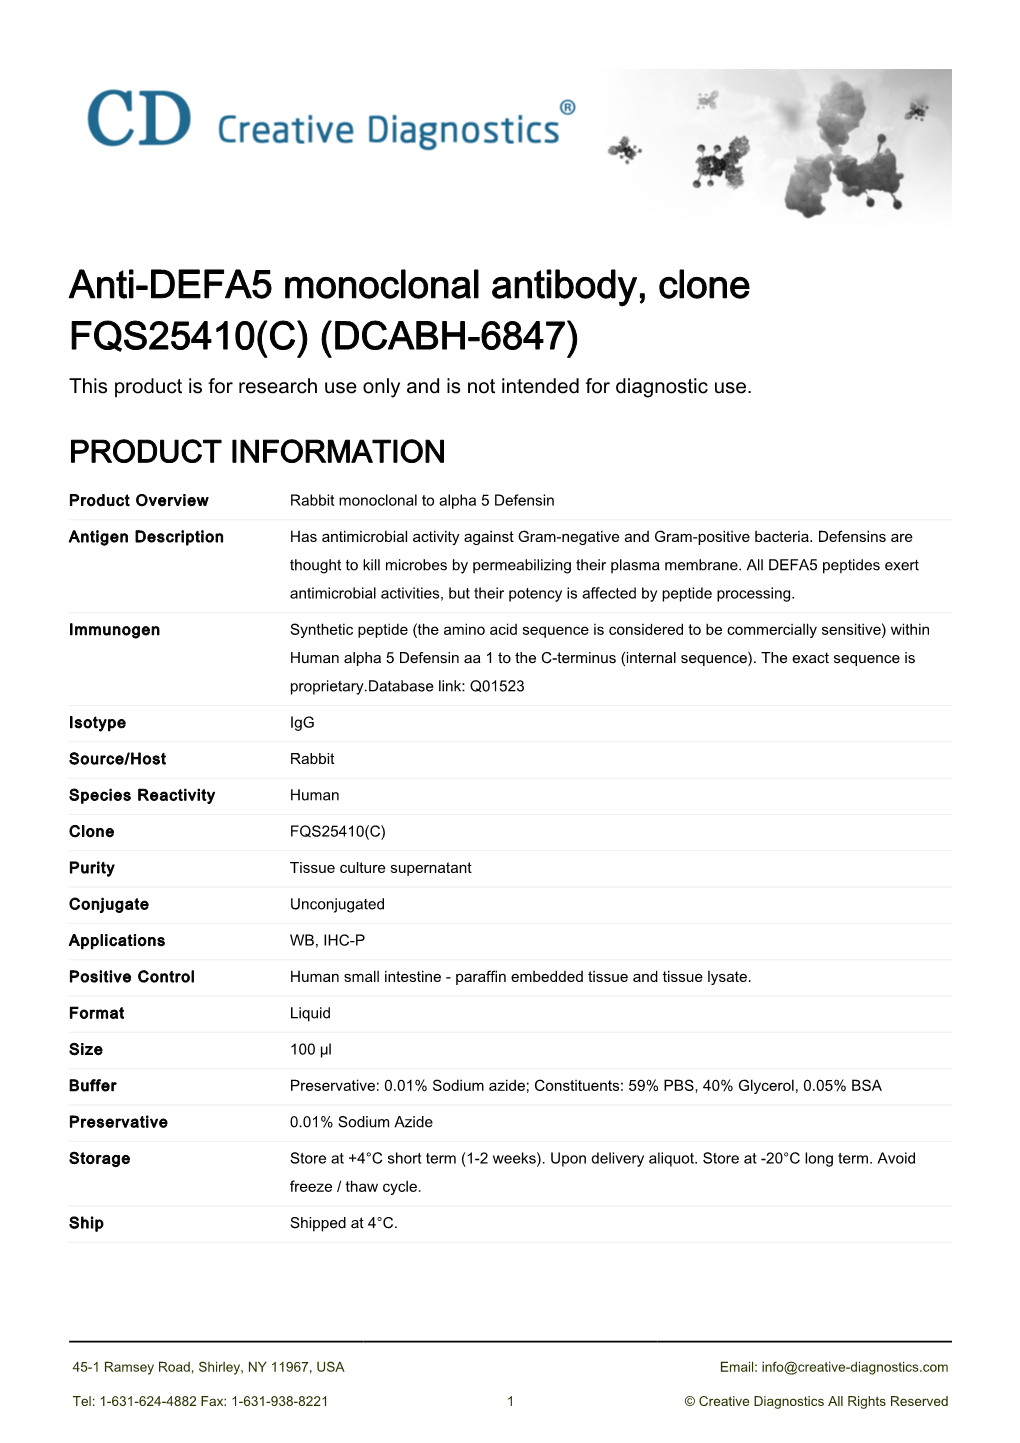 Anti-DEFA5 Monoclonal Antibody, Clone FQS25410(C) (DCABH-6847) This Product Is for Research Use Only and Is Not Intended for Diagnostic Use